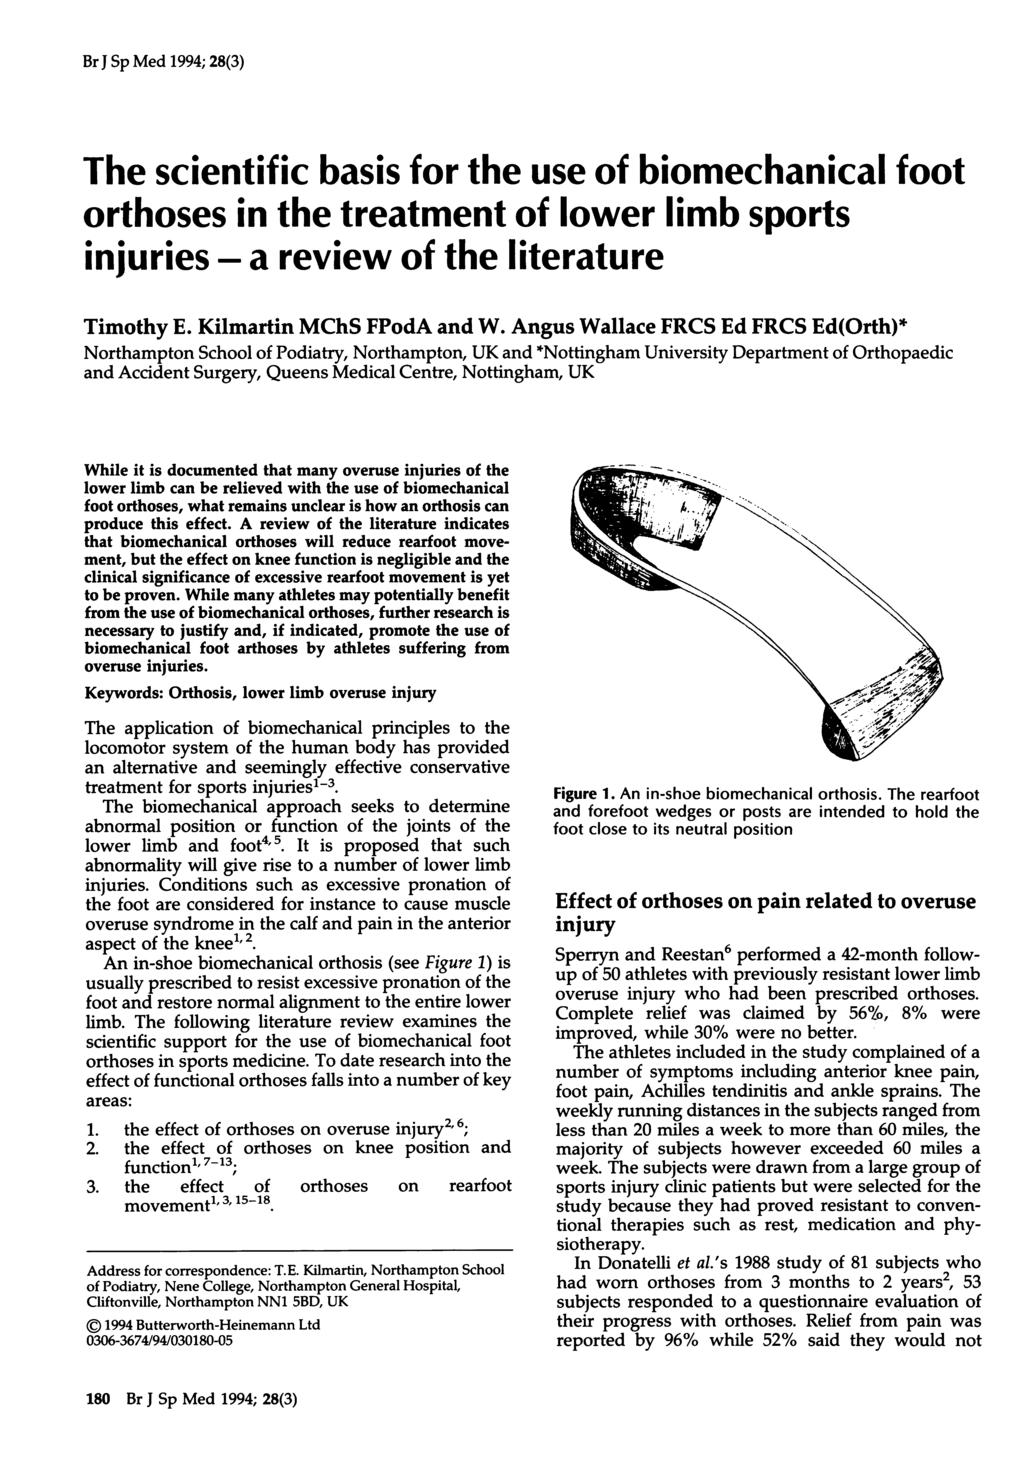 Br J Sp Med 1994; 28(3) The scientific basis for the use of biomechanical foot orthoses in the treatment of lower limb sports injuries - a review of the literature Timothy E.